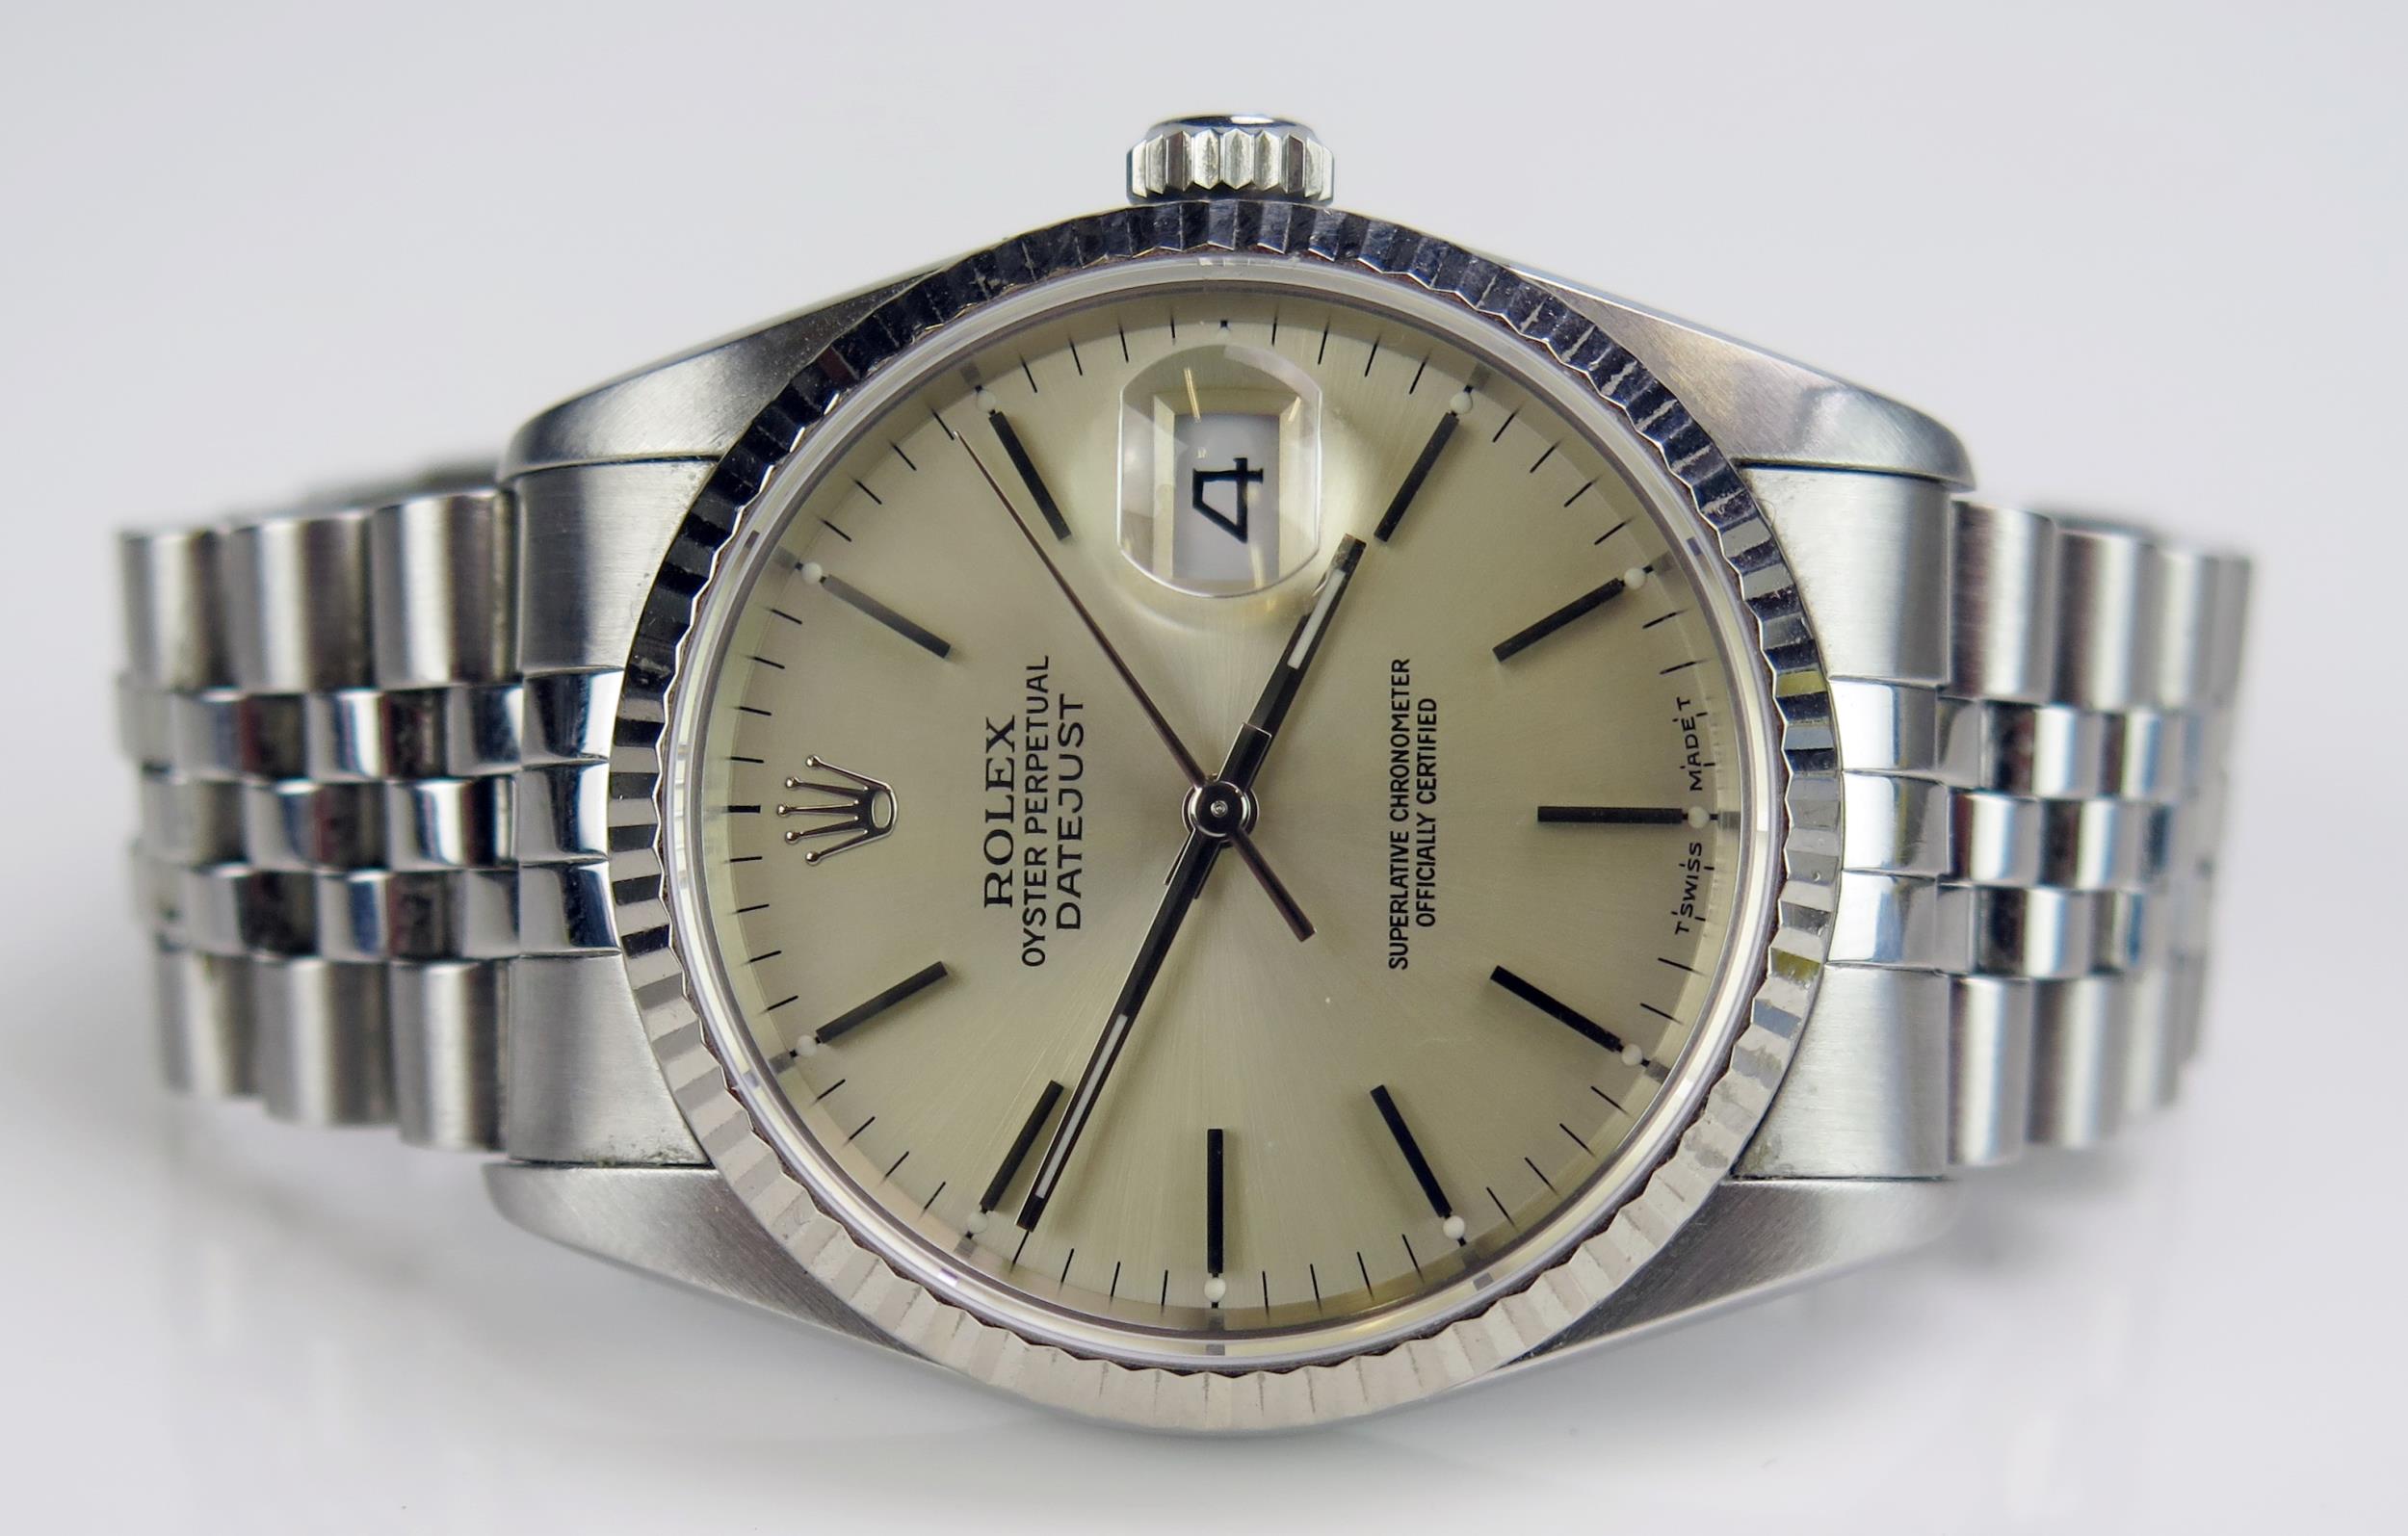 A ROLEX Gent's Oyster Perpetual Datejust S.C.O.C. Steel Cased Wristwatch on a 63600 Jubilee Bracelet - Image 2 of 10